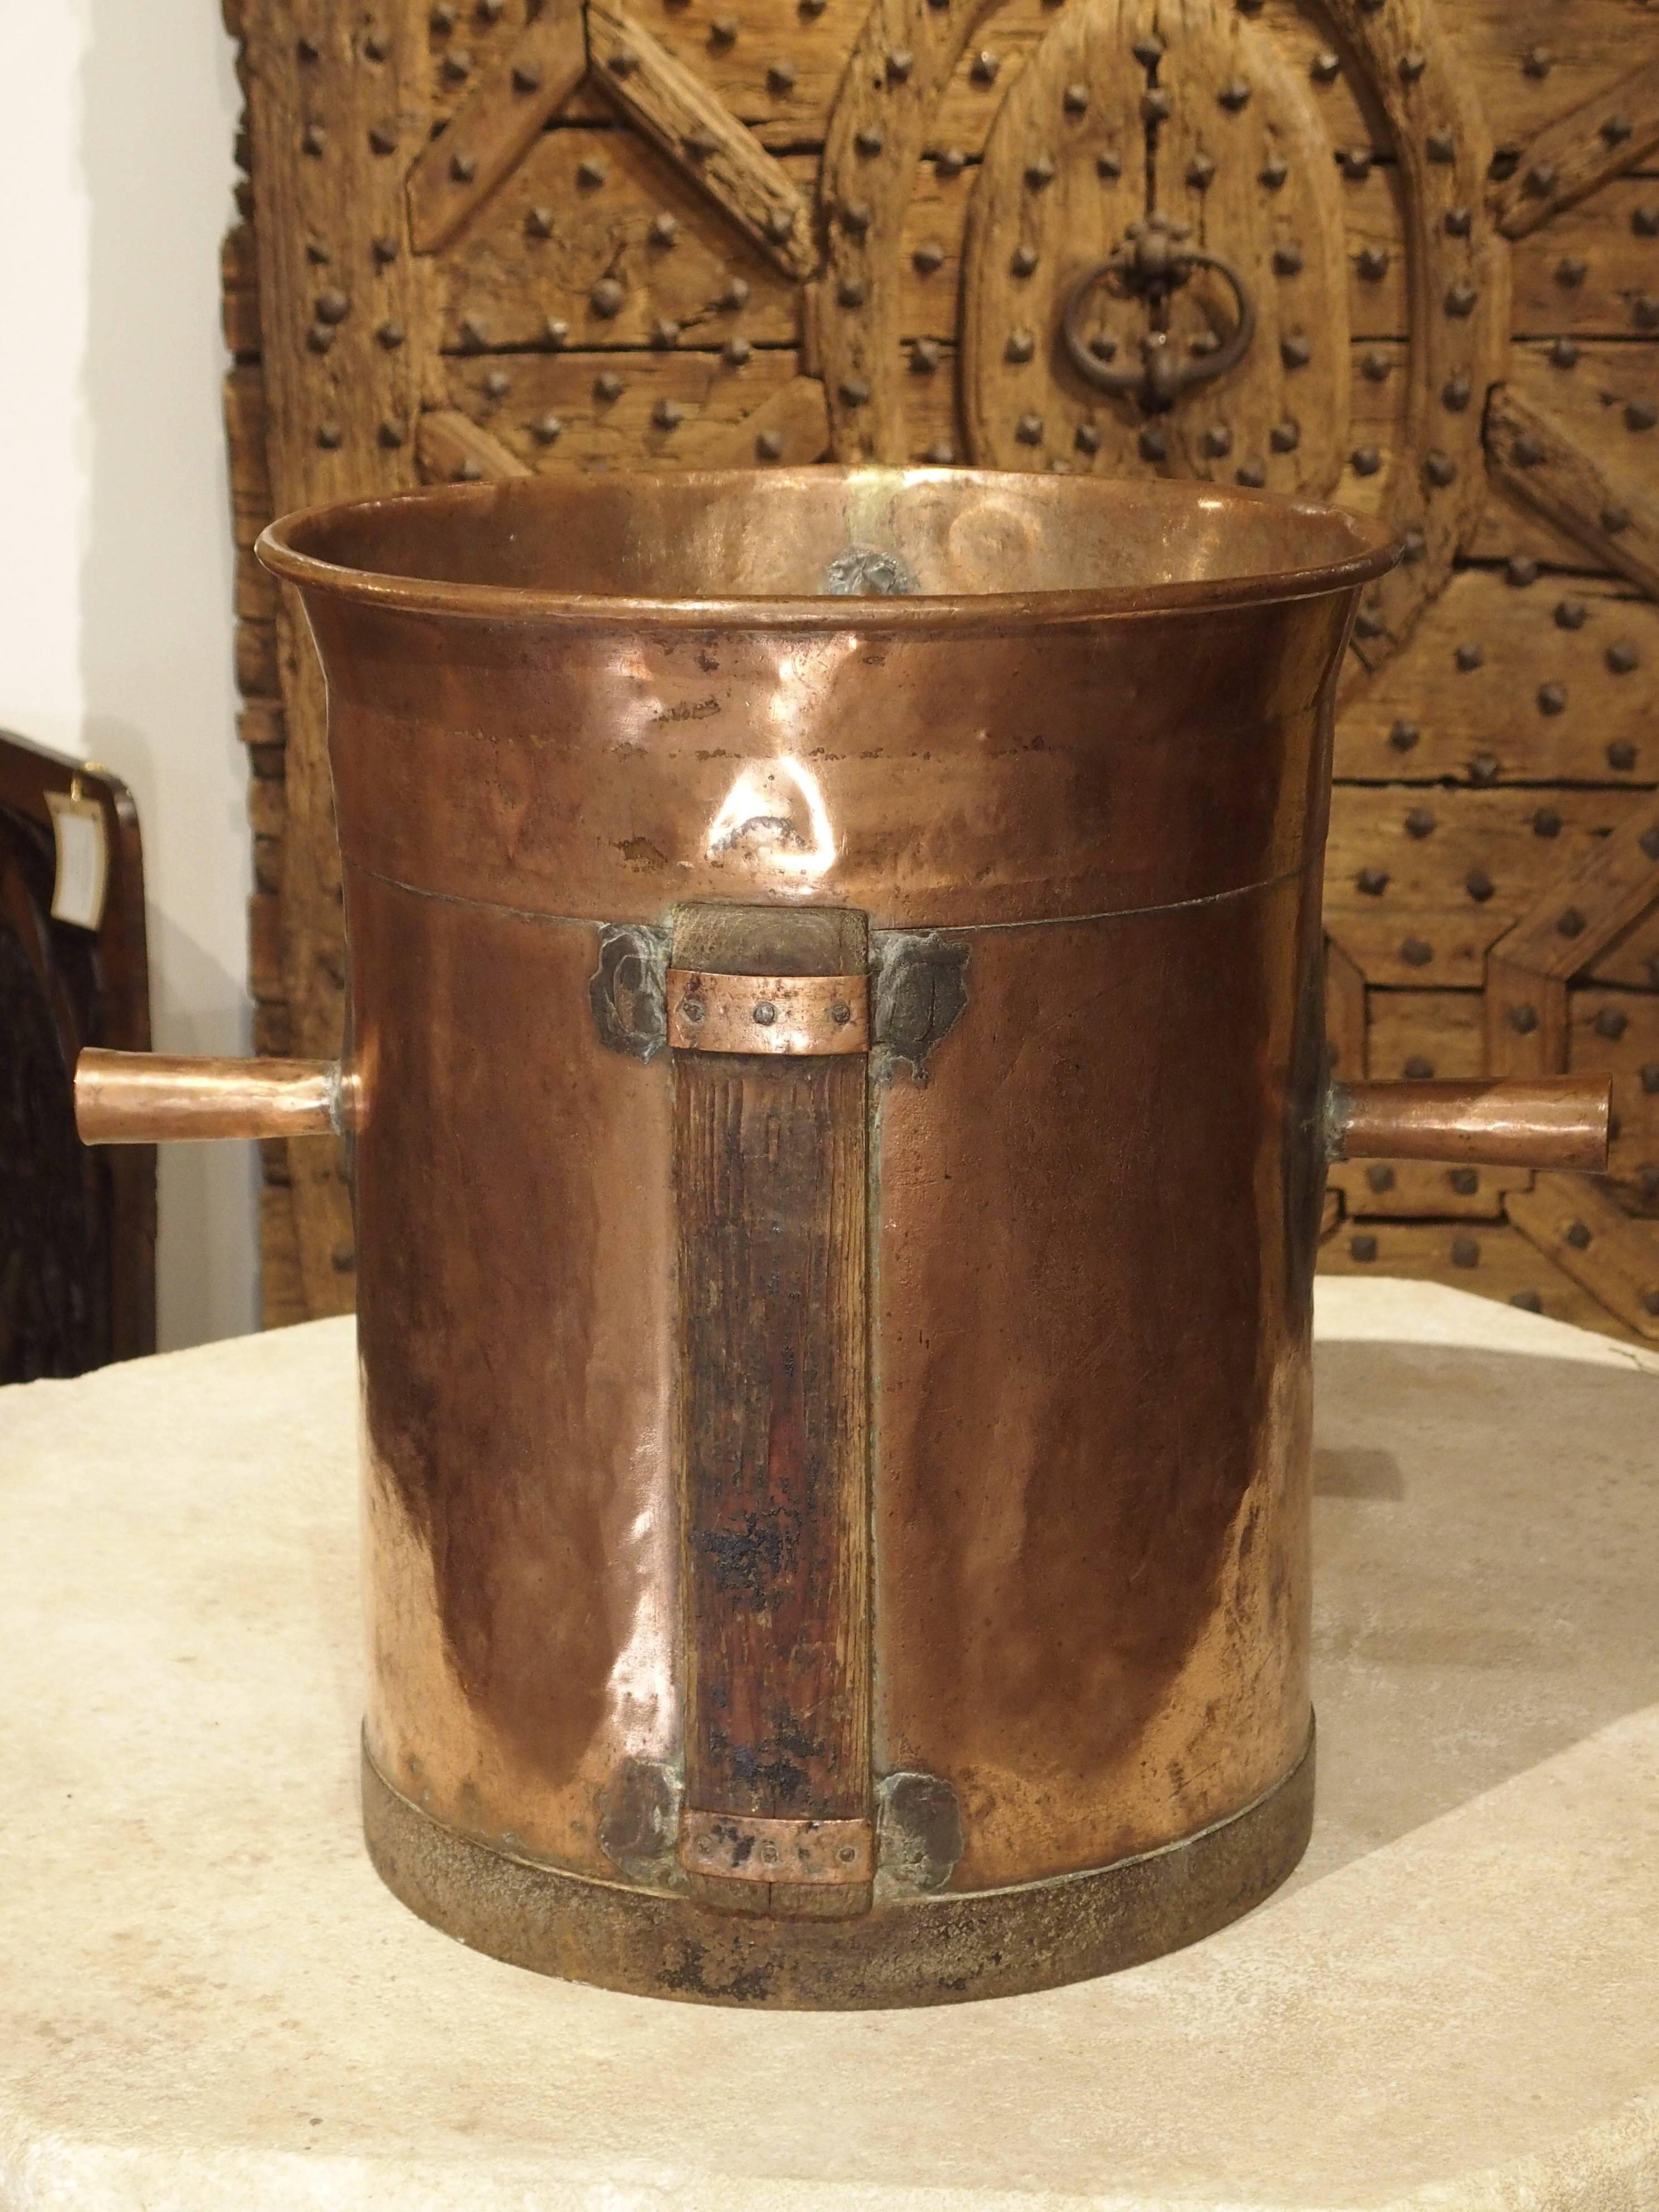 19th Century Antique Copper 50 Liter Wine Vessel from Carcassonne France, circa 1850